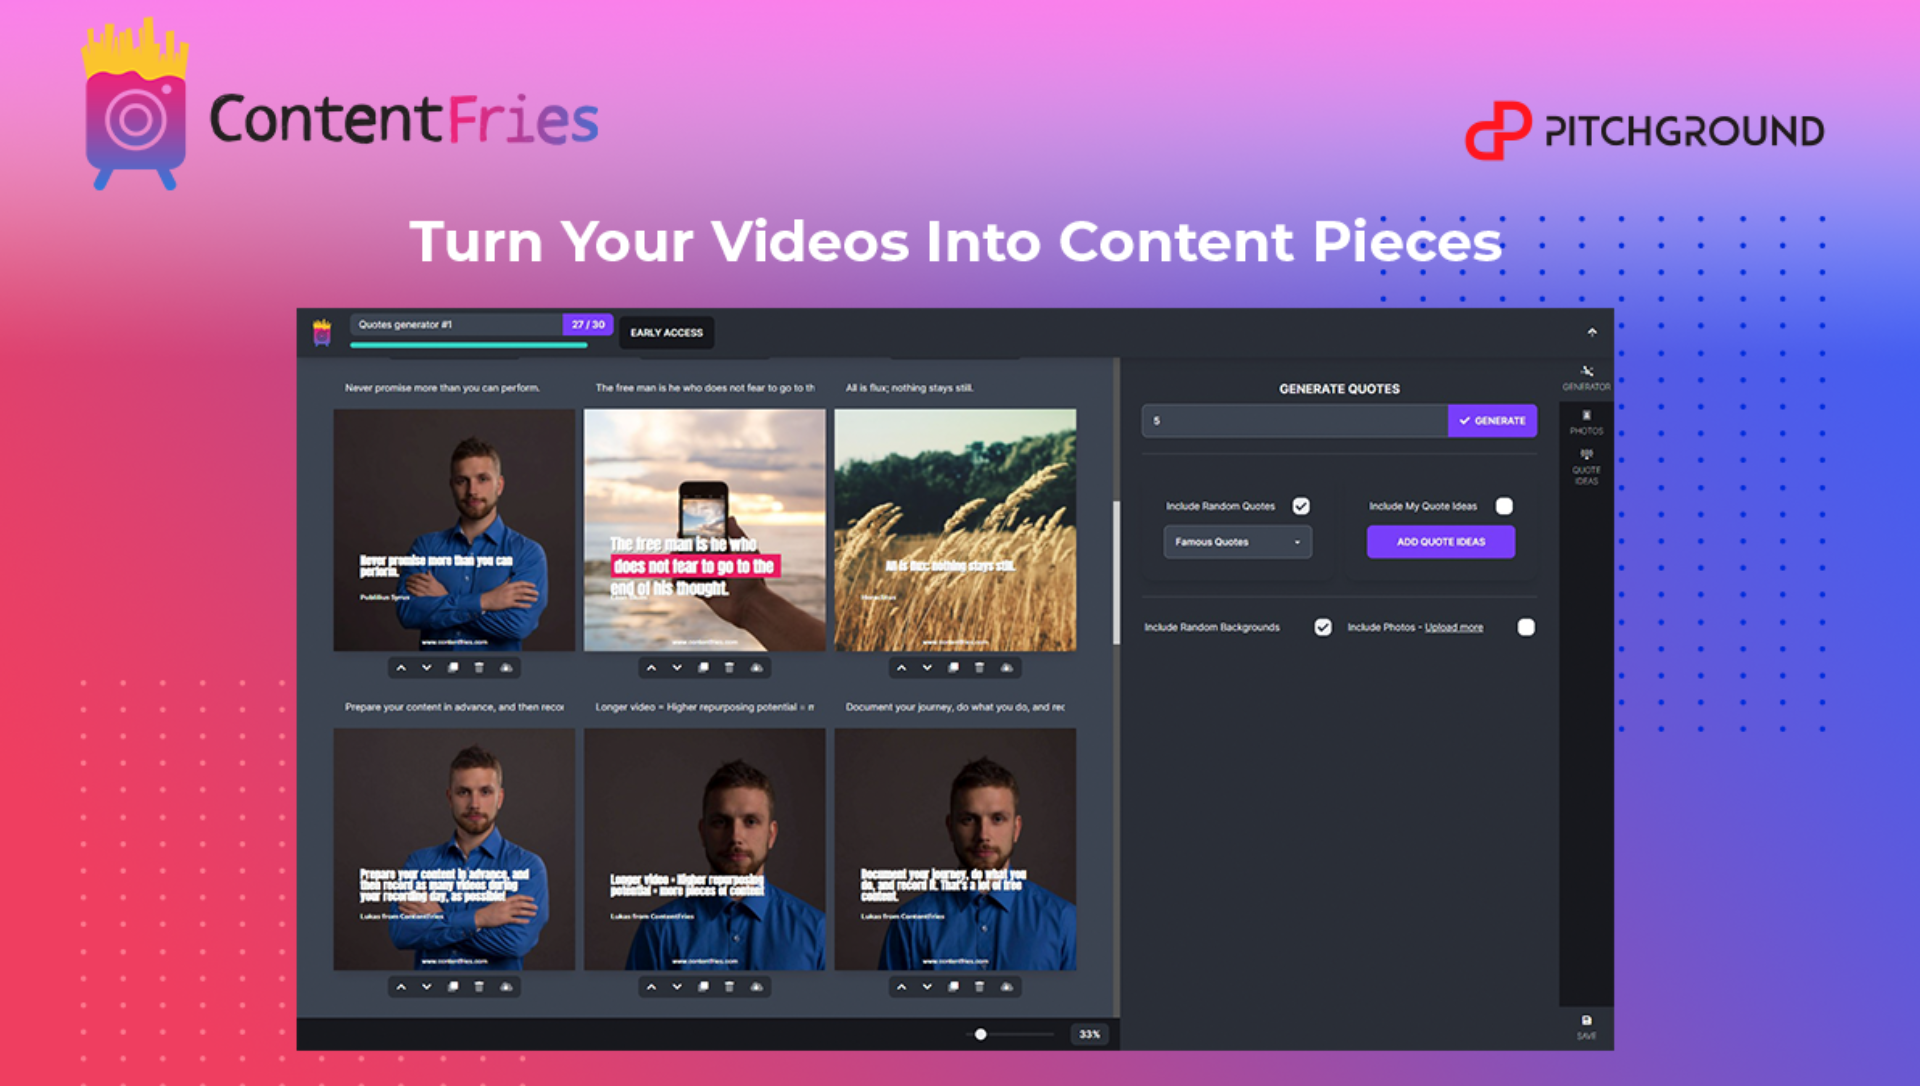 Lifetime Deal to ContentFries: Plan F (Unlimited) for $1997